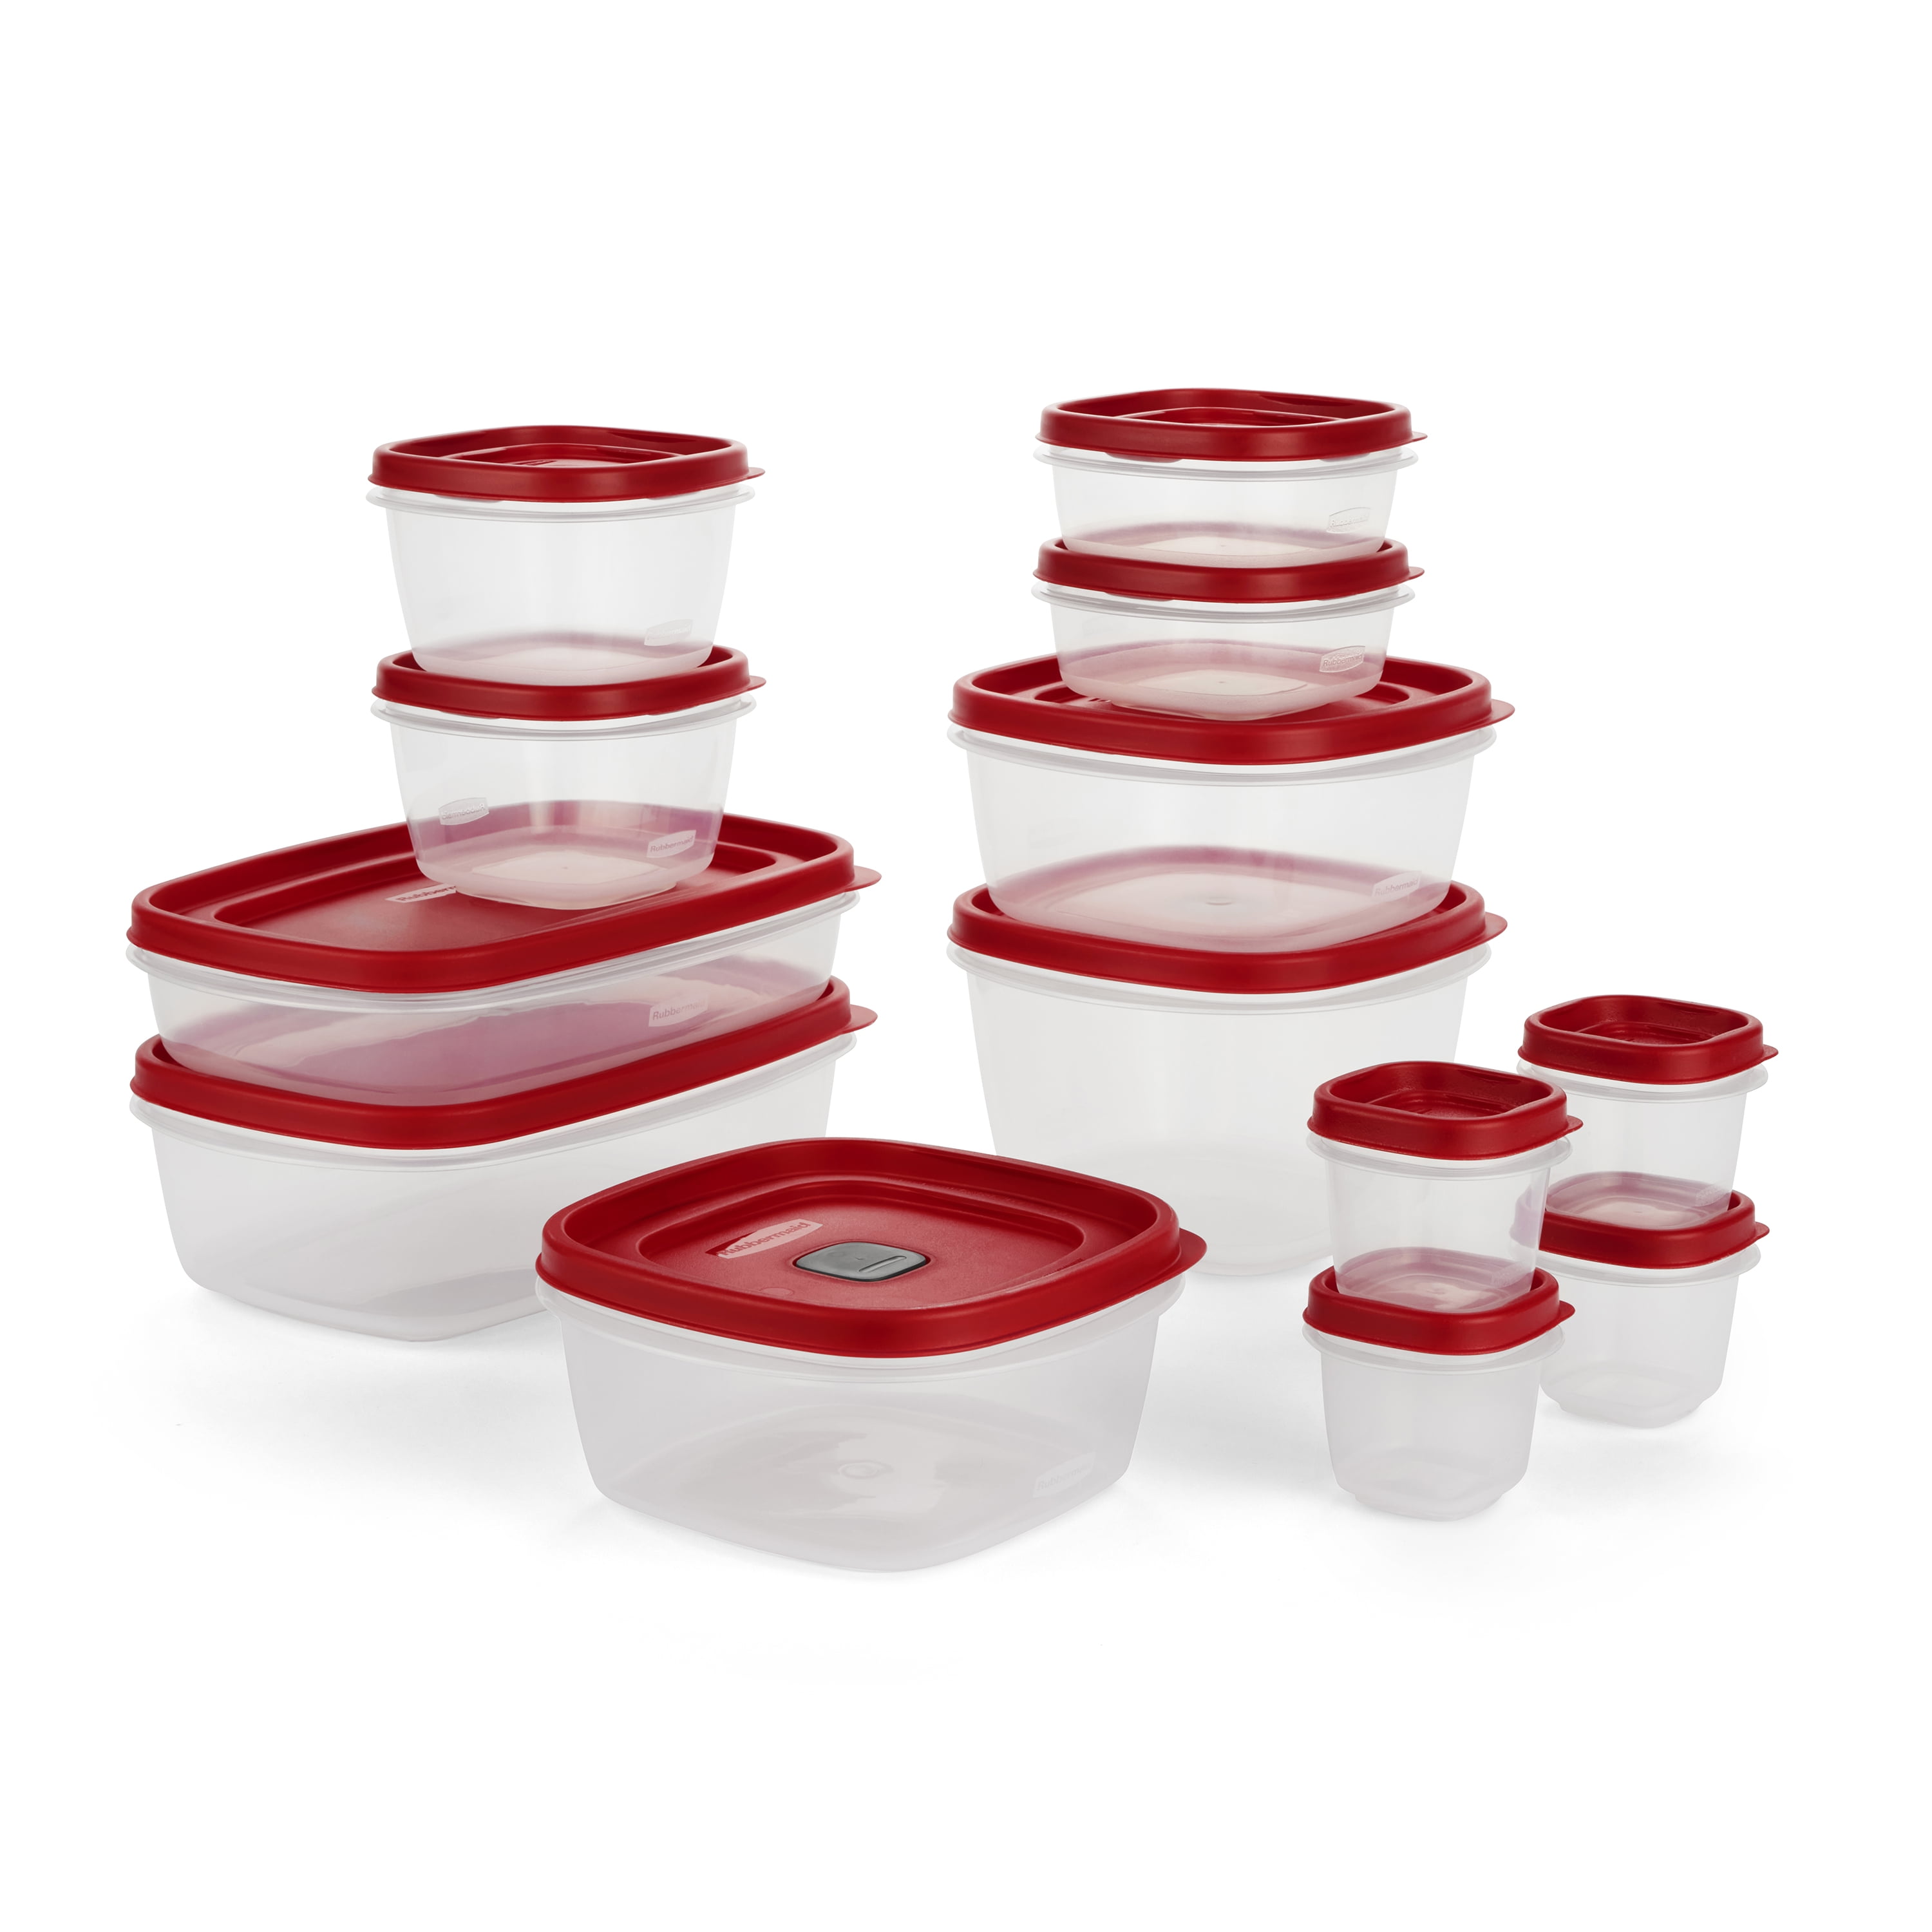 Rubbermaid EasyFindLids Food Storage Containers with Silvershield Antimicrobial Product Protection, 46-Piece Set